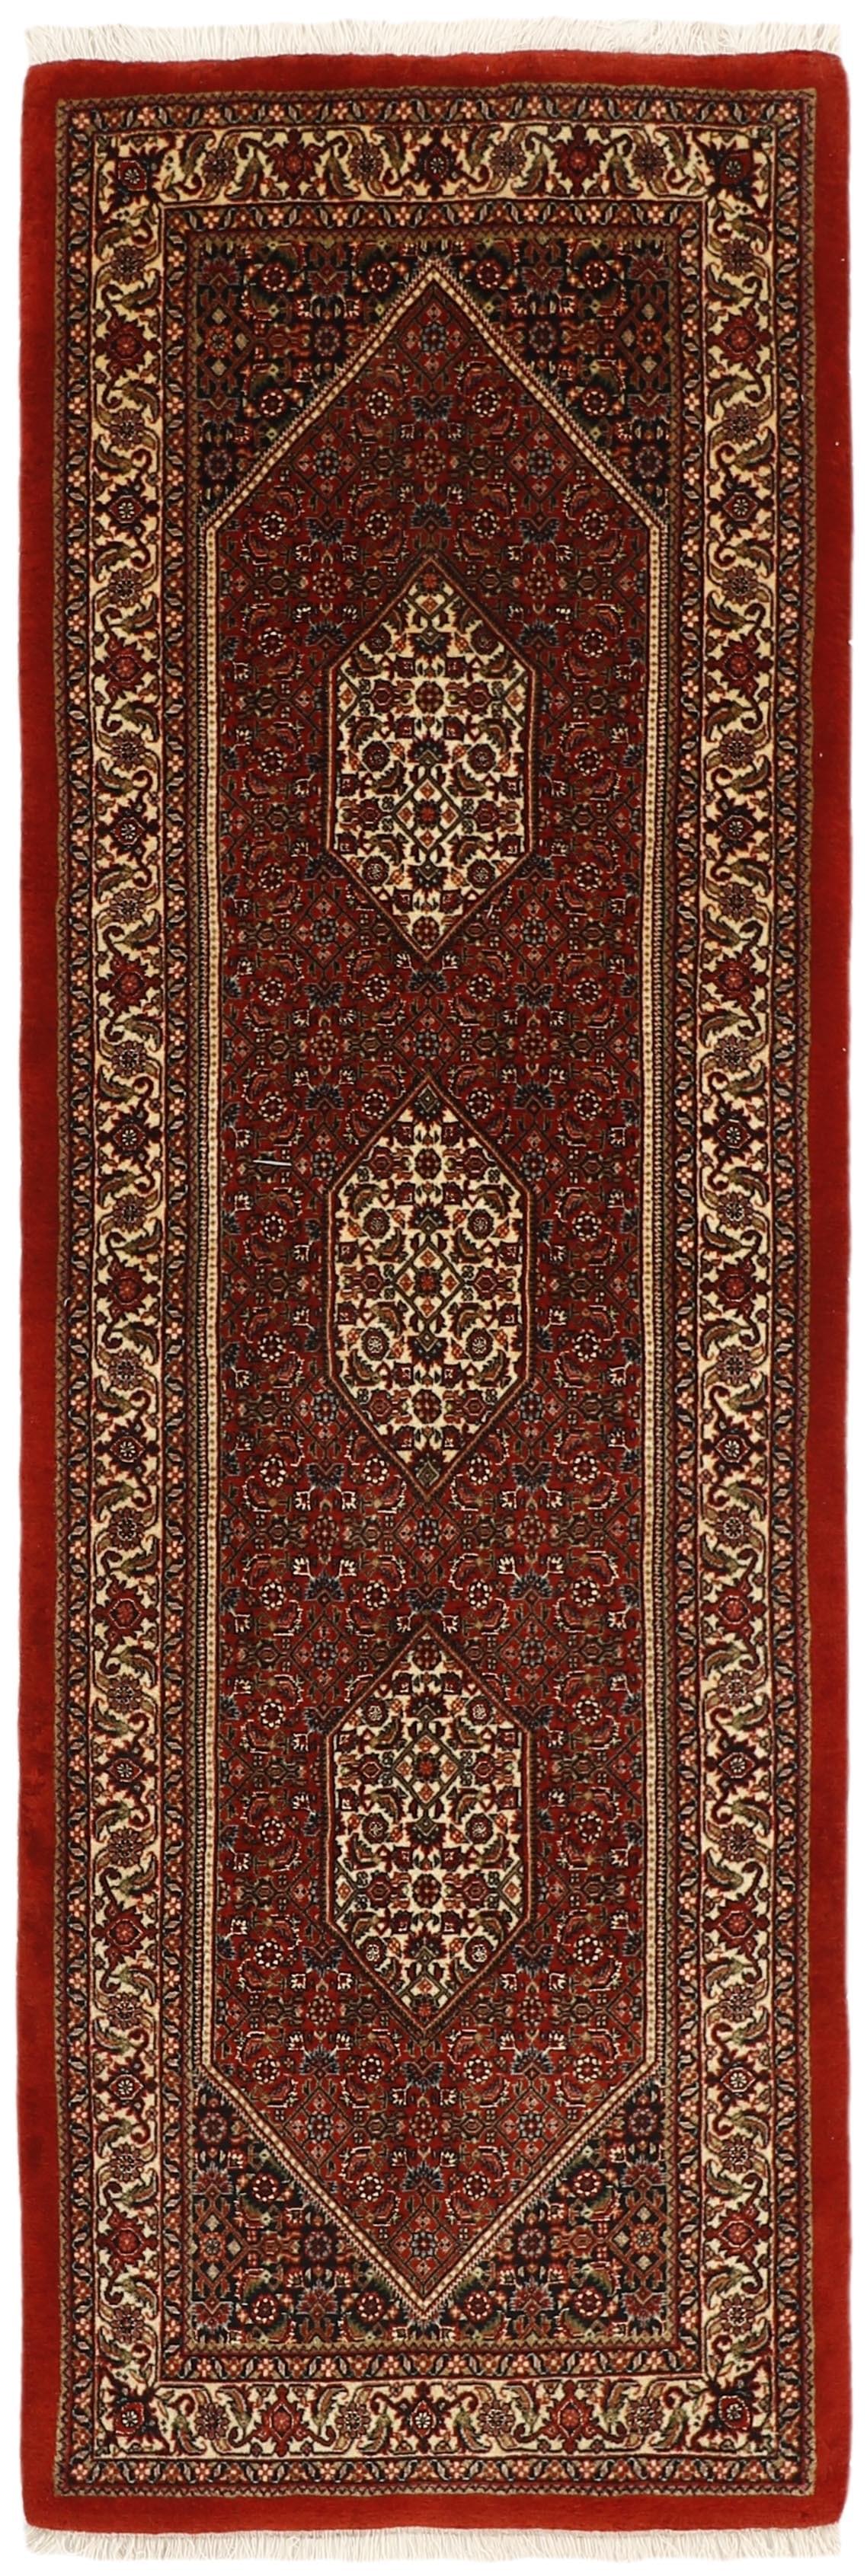 Red and cream persian runner with traditional floral design